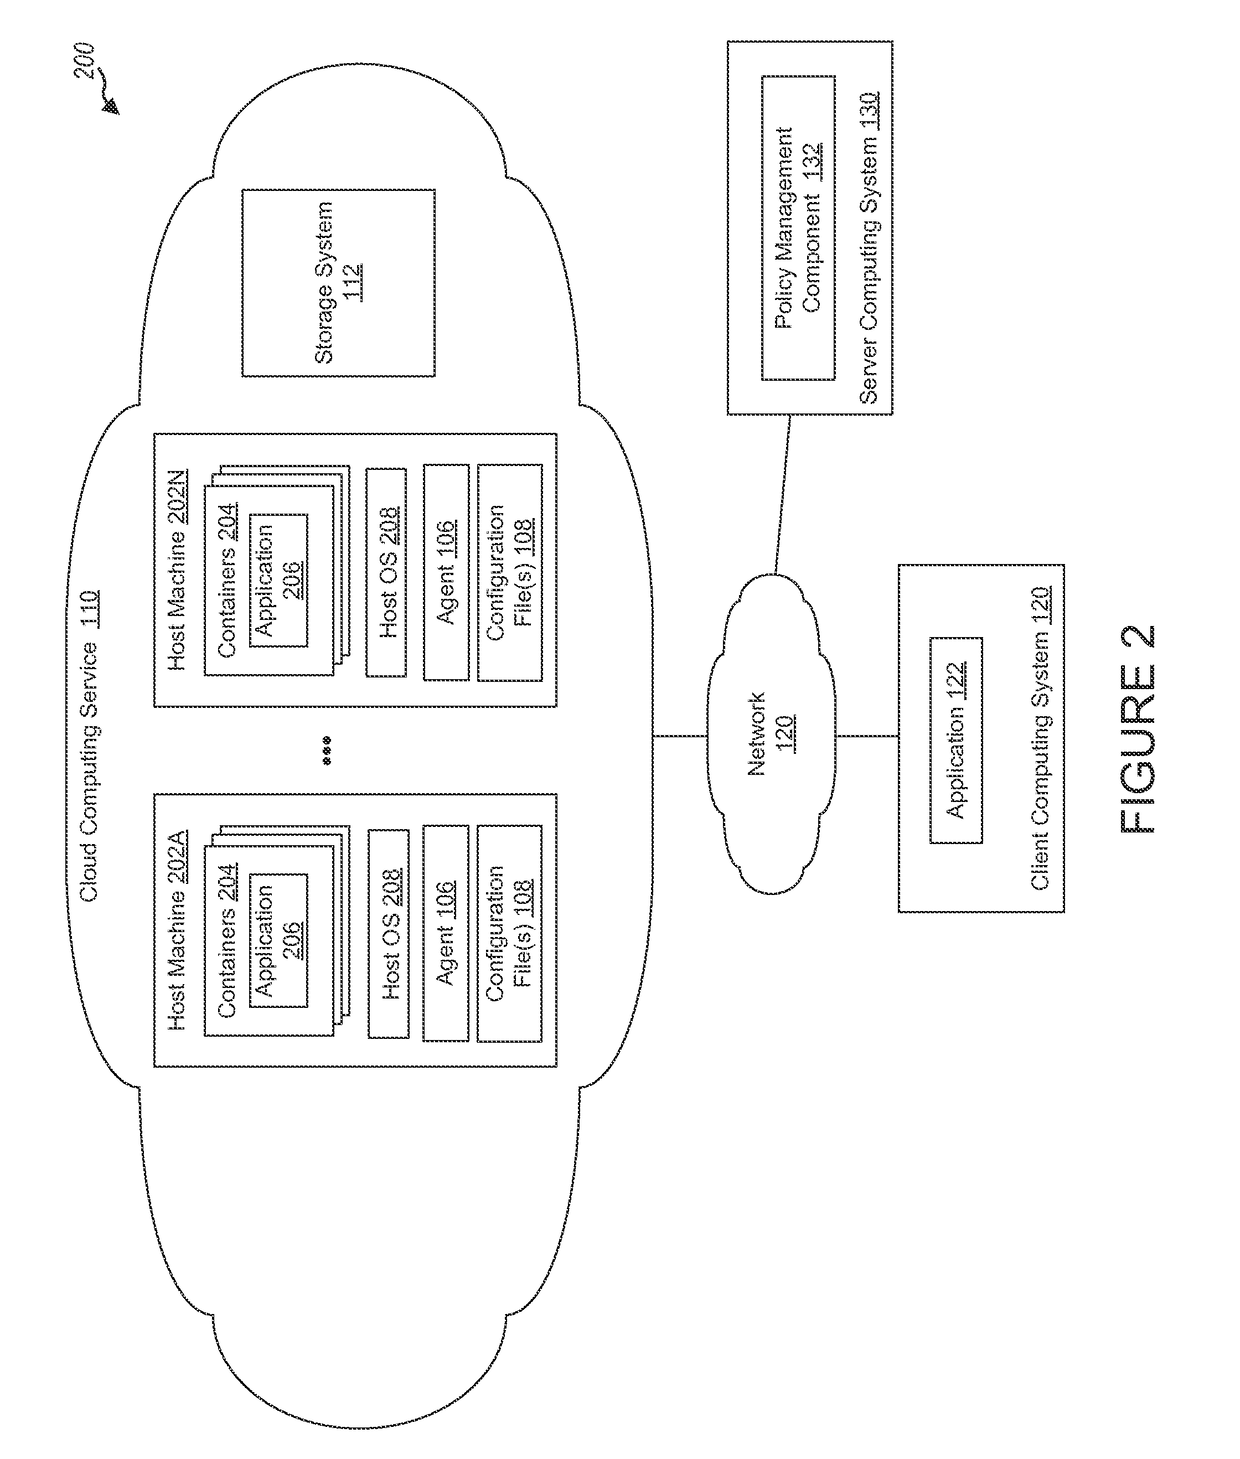 Automated construction of network whitelists using host-based security controls